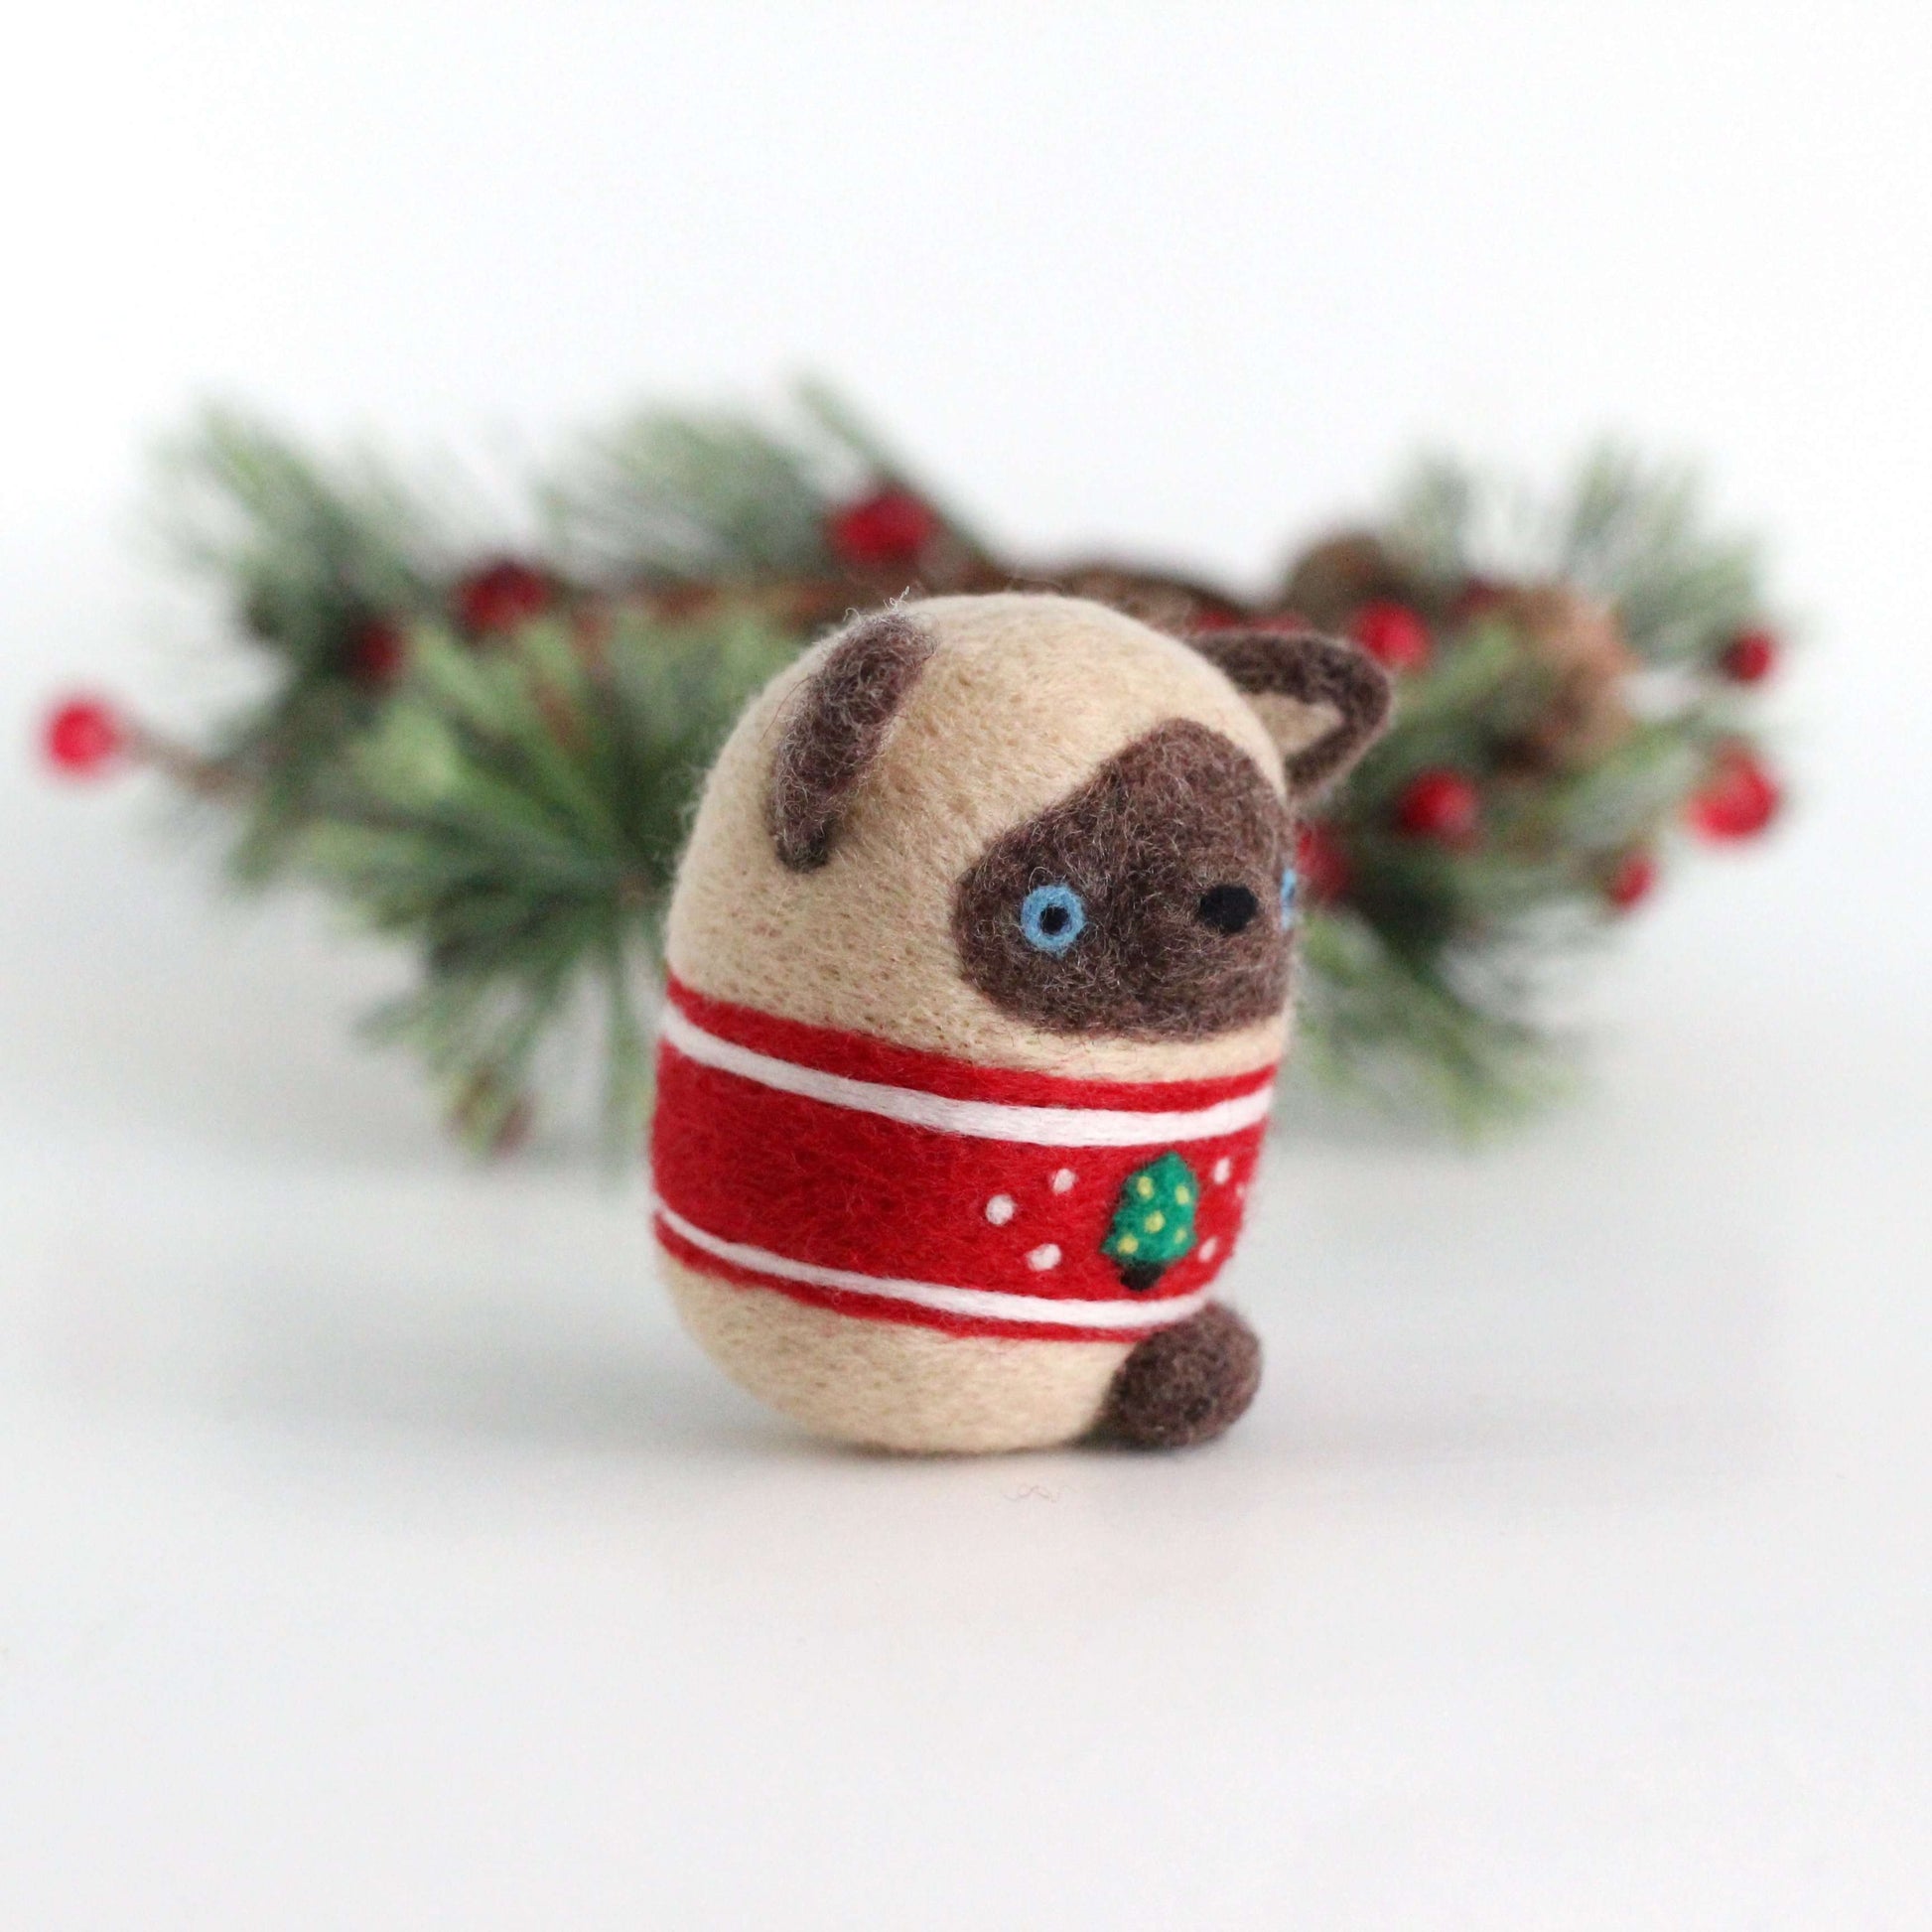 Needle Felted Siamese Cat in Christmas Tree Sweater by Wild Whimsy Woolies